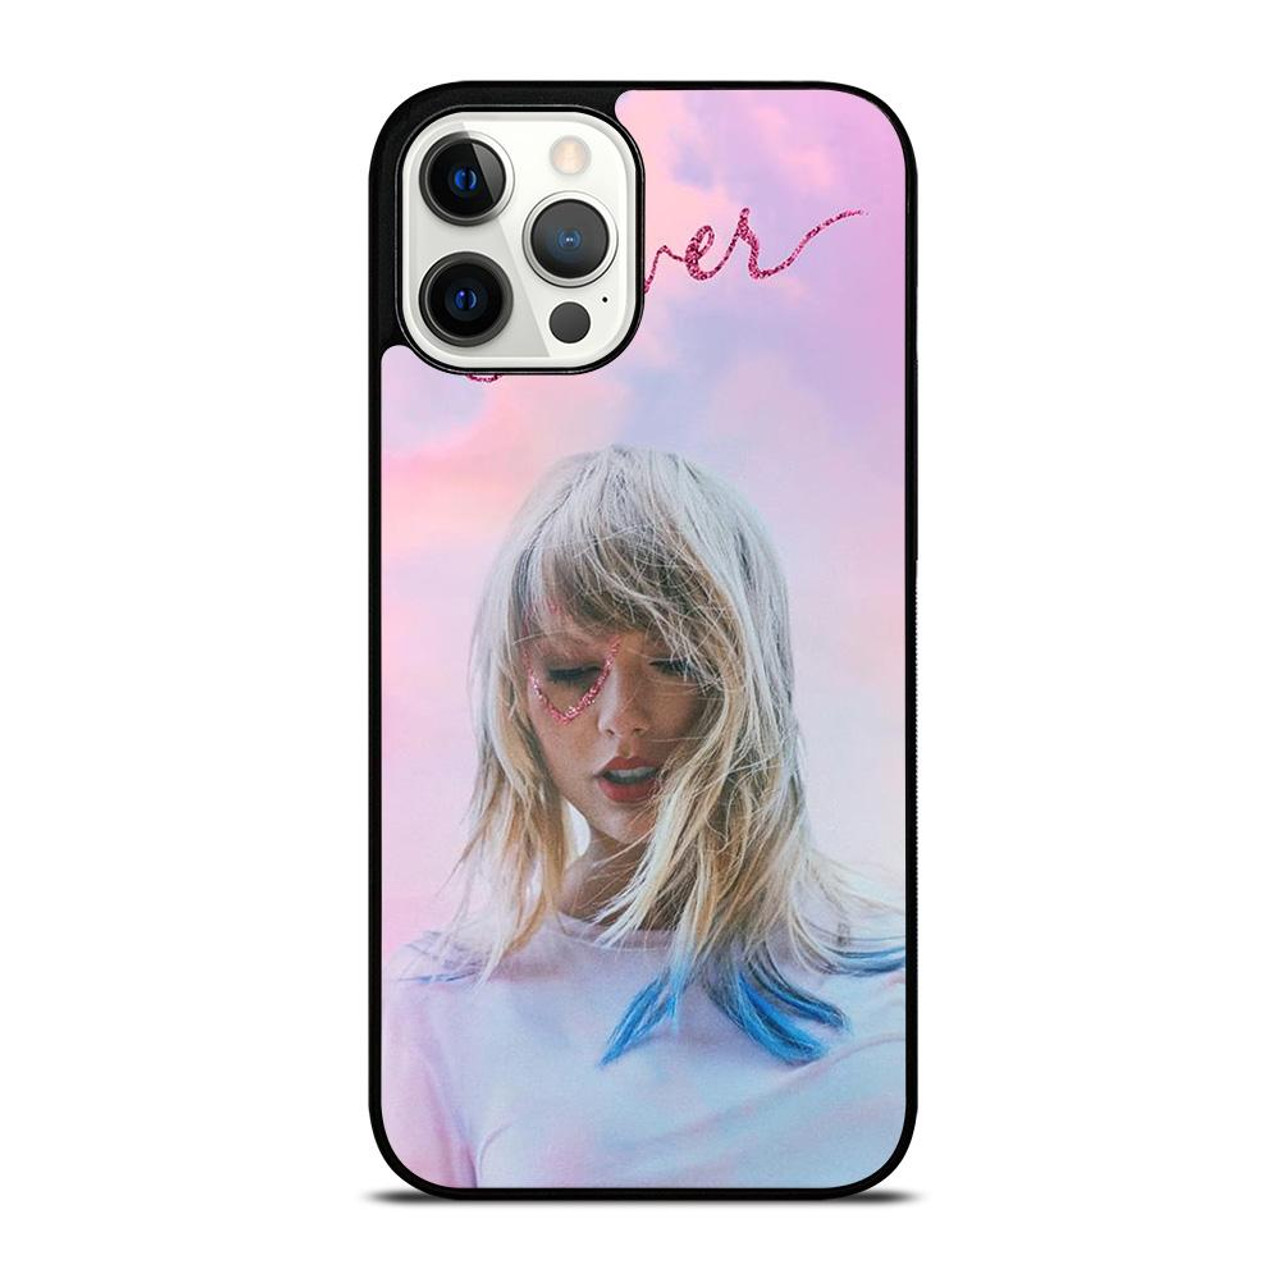 TAYLOR SWIFT LOVER iPhone 12 Pro Max Case Cover